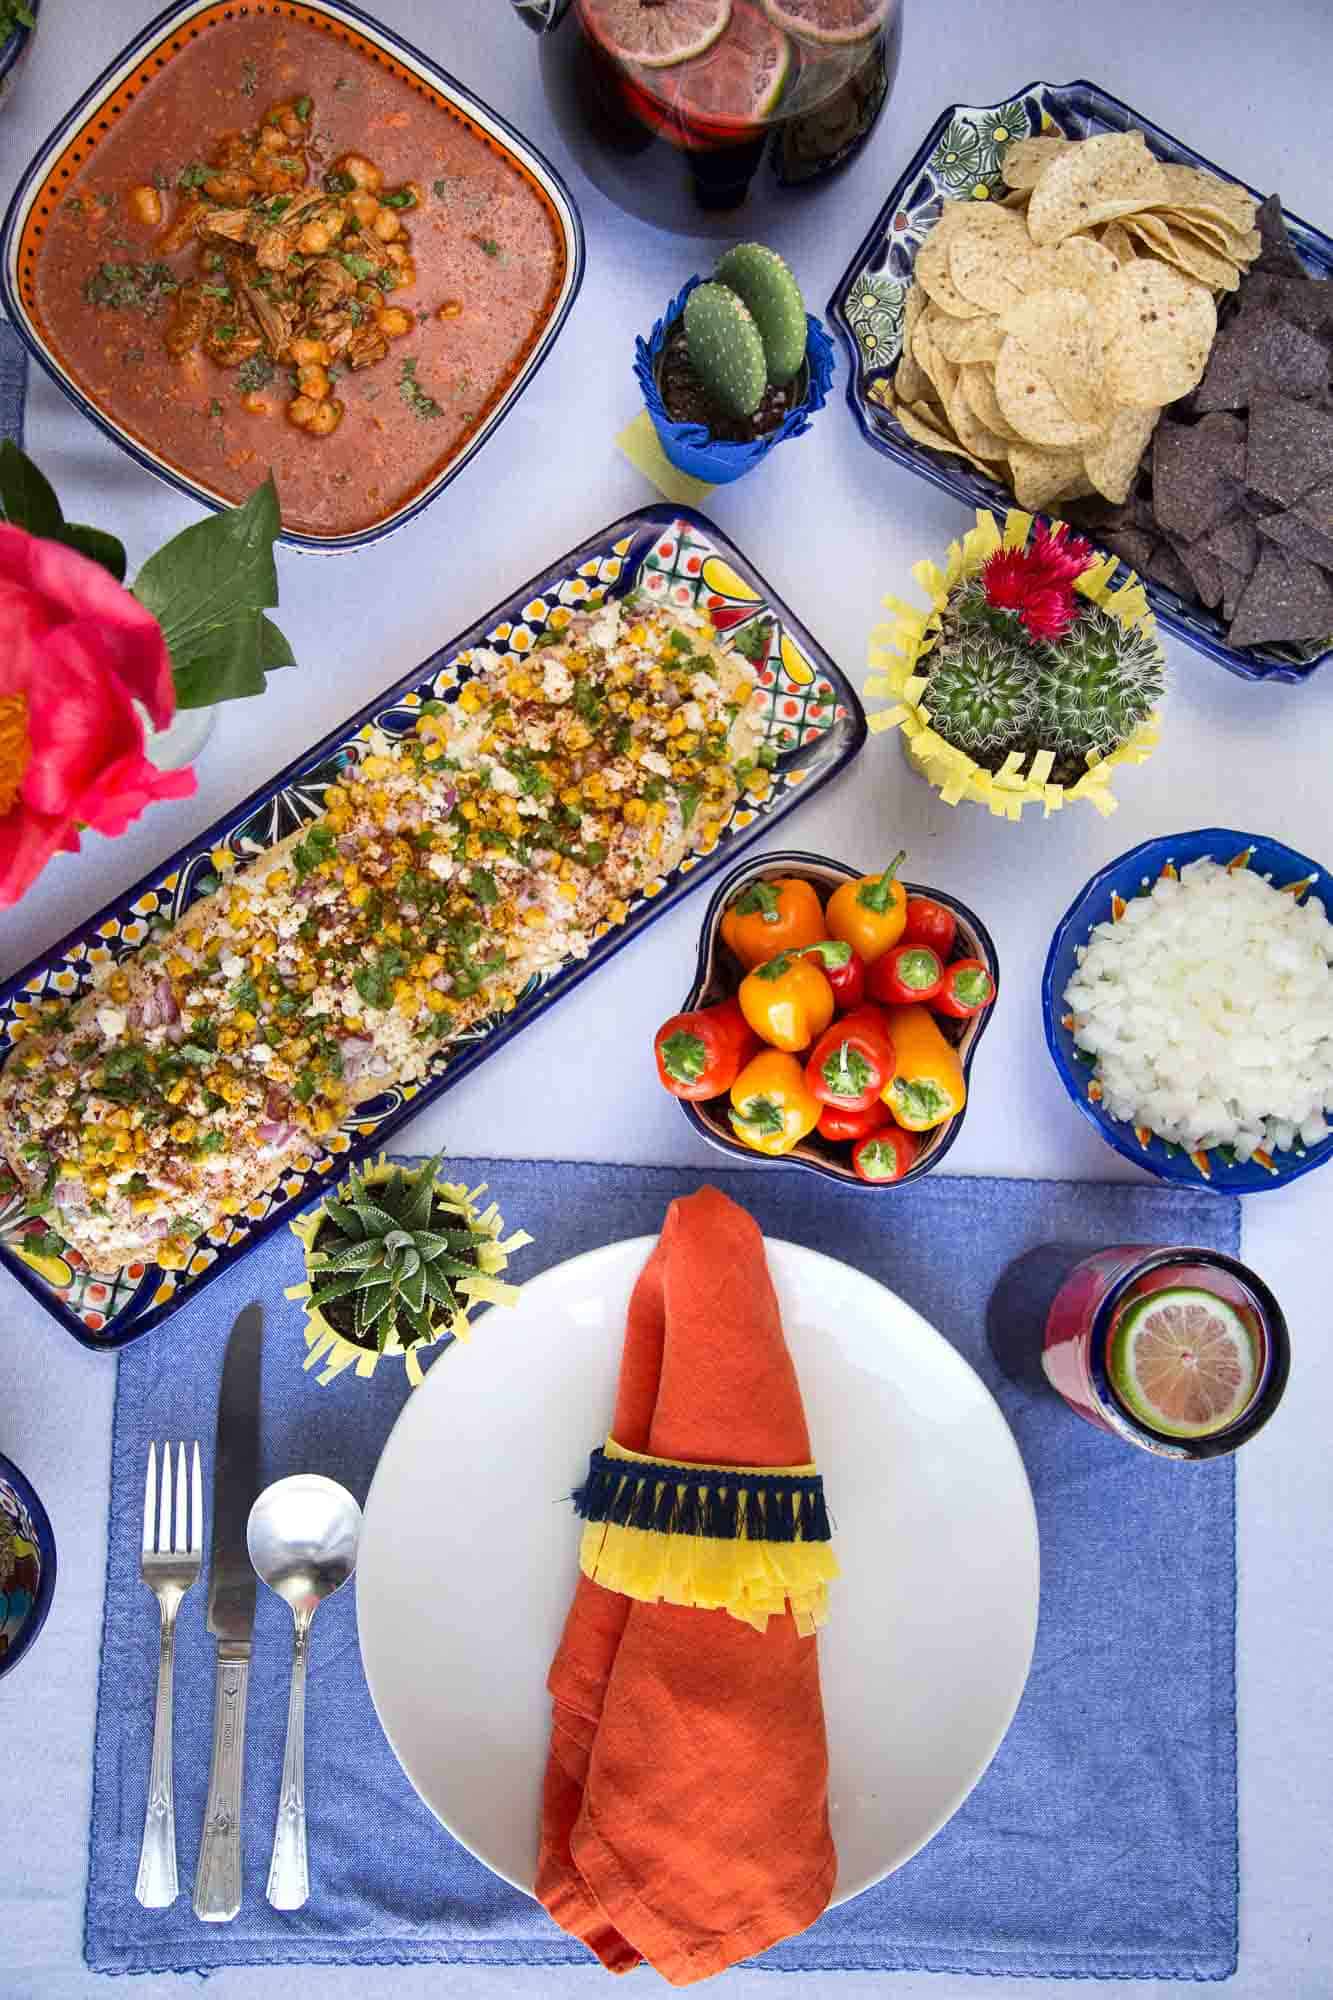 table set for cinco de mayo with colorful mexican dishes, an orange napkin, blue placemat, and cacti decor.